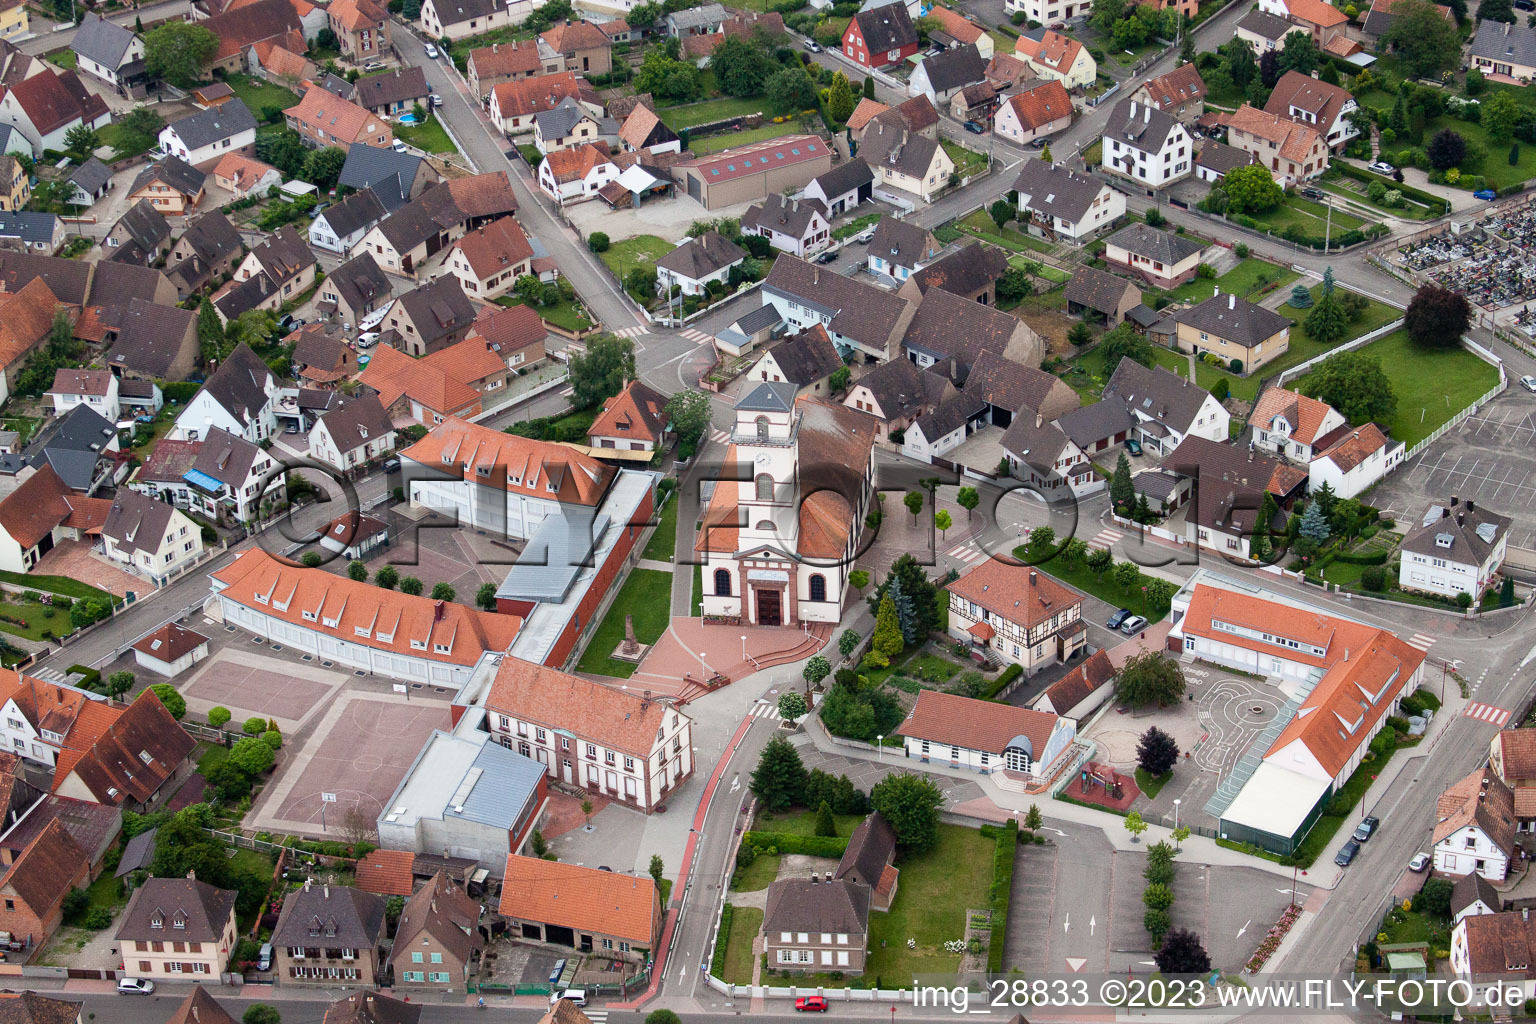 Oblique view of Drusenheim in the state Bas-Rhin, France